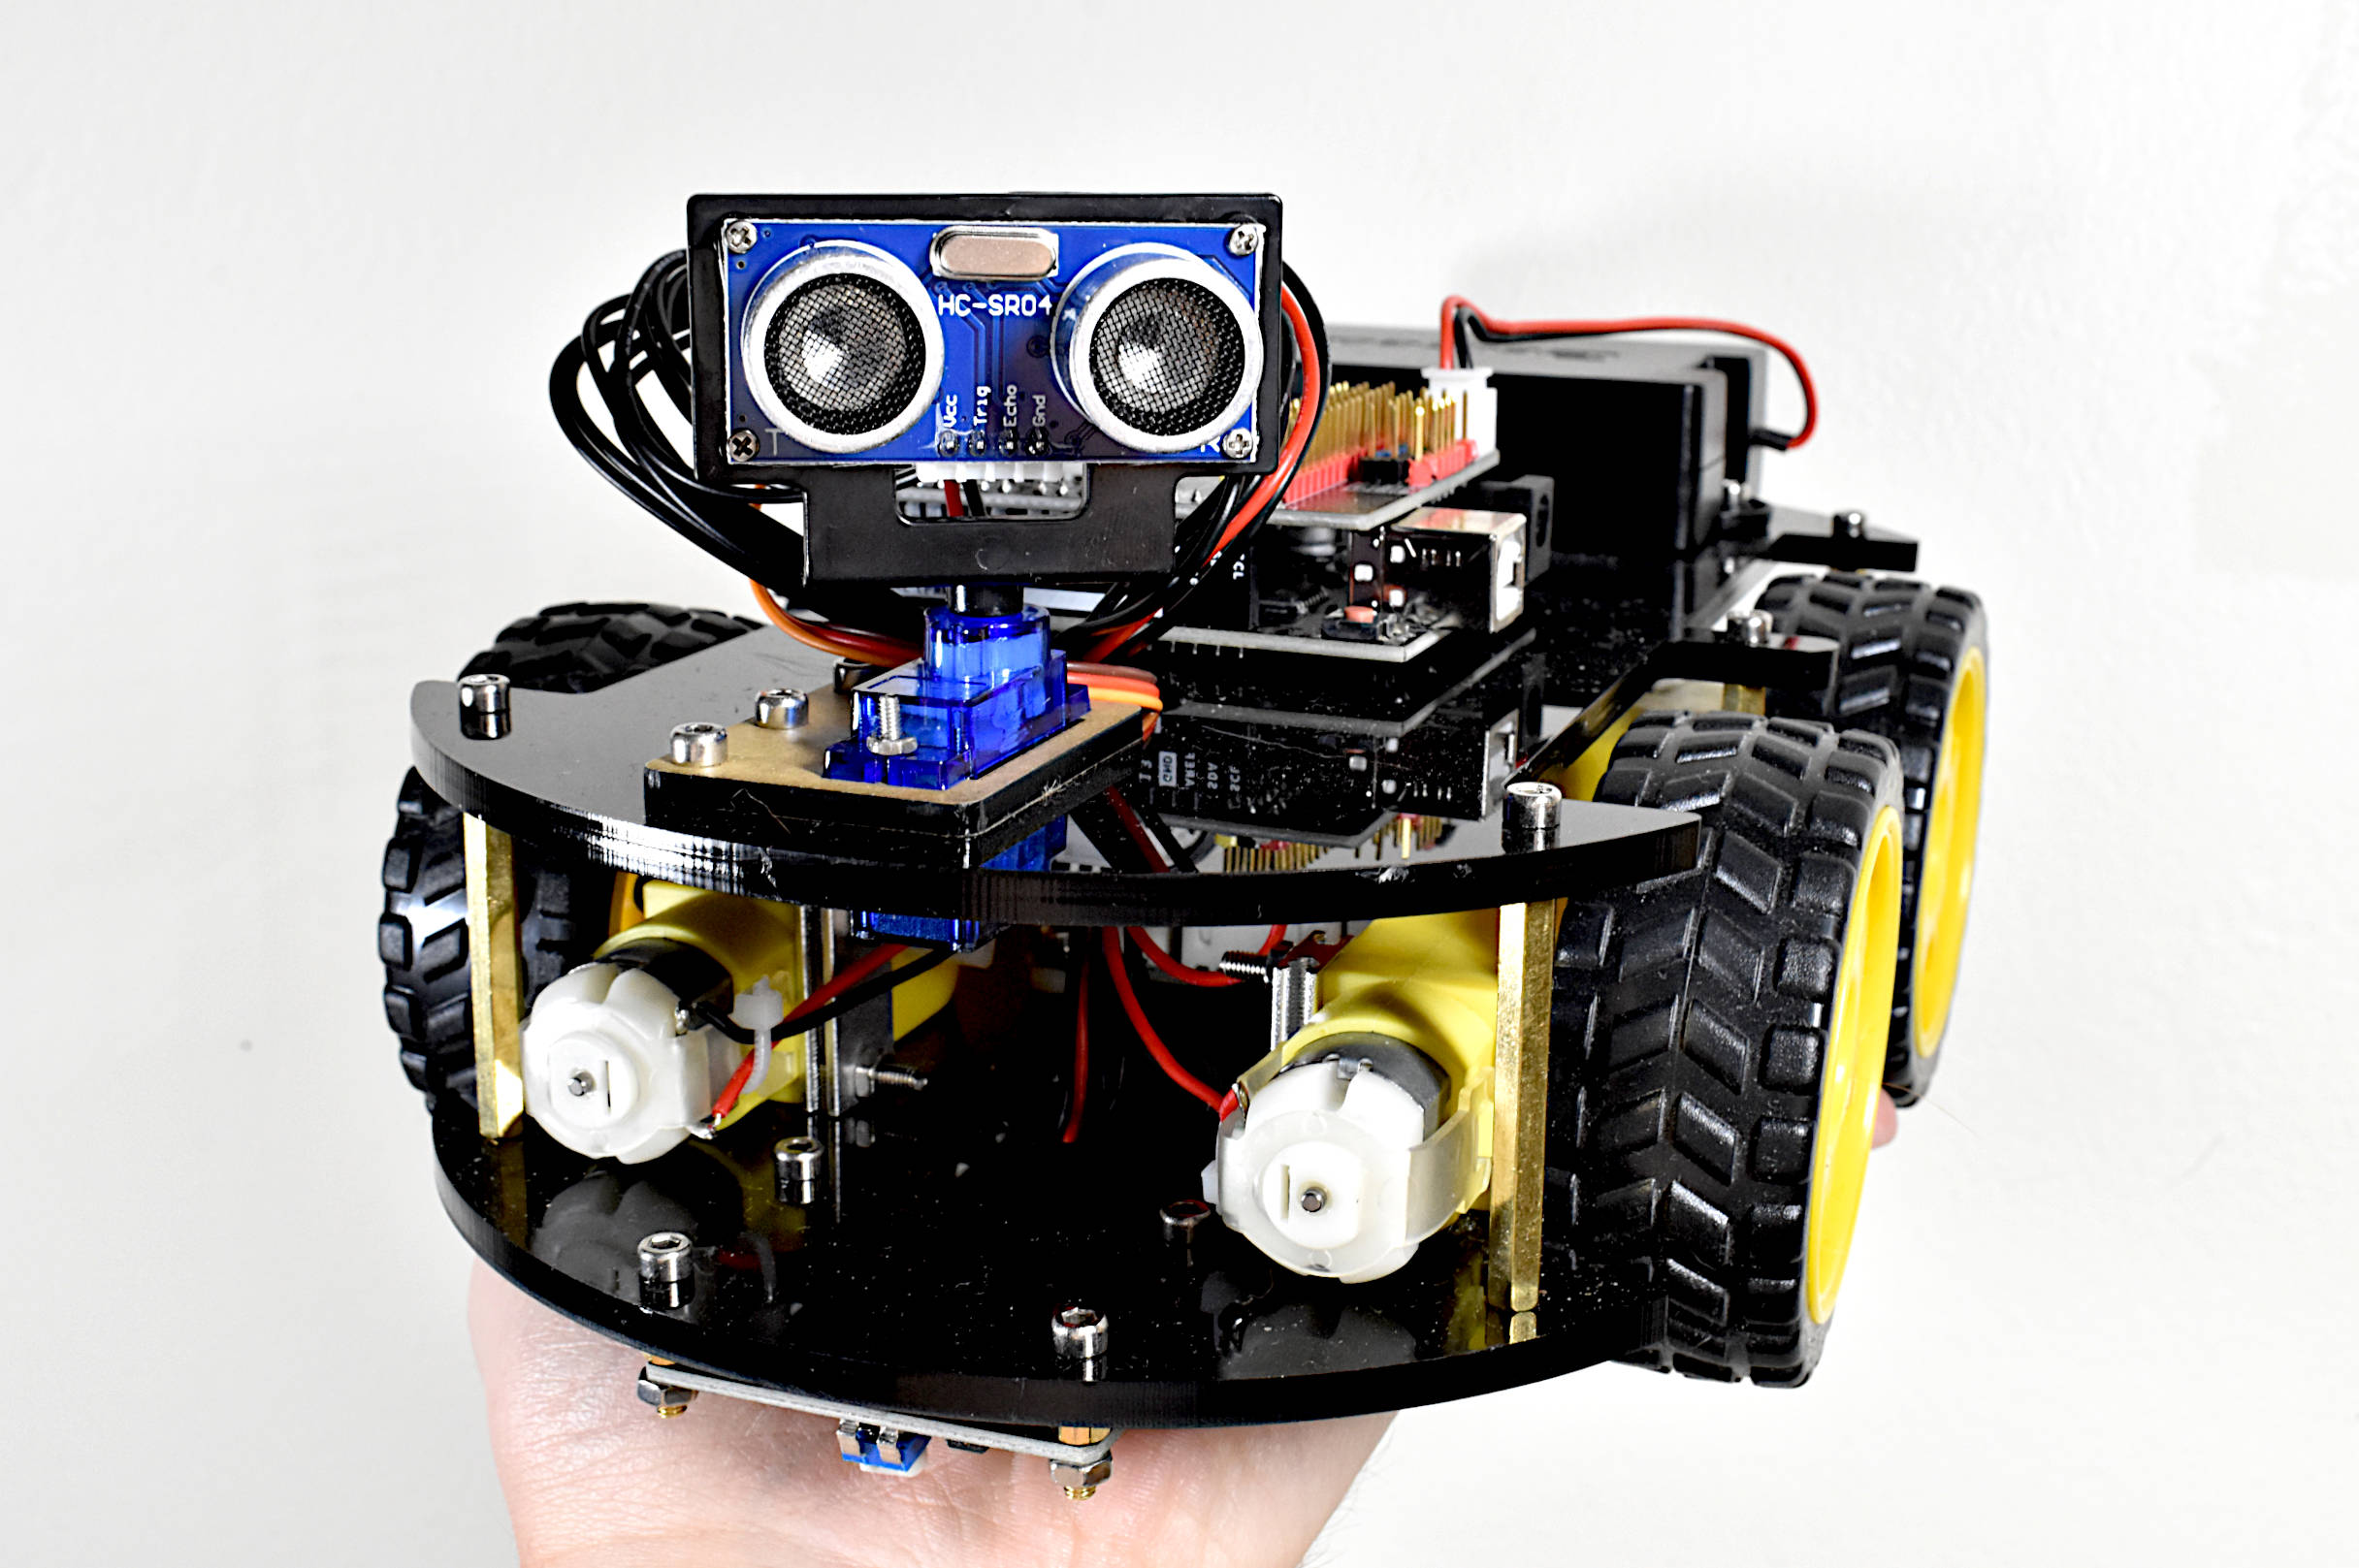 Details about   Smart Car Tracking Motor Smart Robot Chassis 2WD Ultrasonic Arduino CH340G NEW 